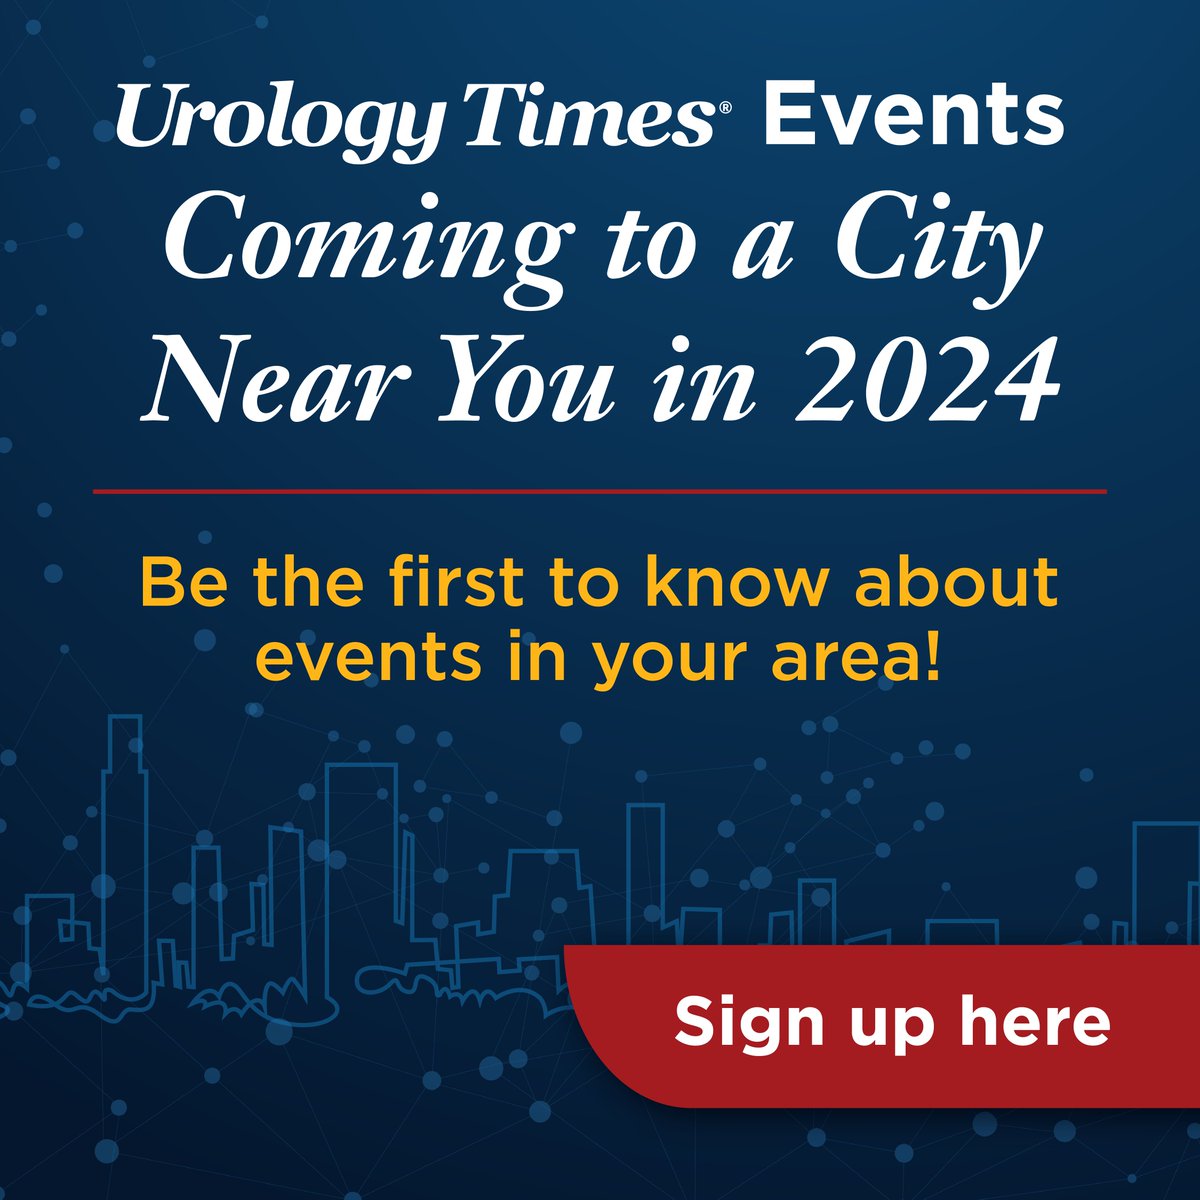 Get ready to elevate your practice and expand your network with Urology Times® Events coming to a city near you in 2024! Sign up for our eNewsletter to be the first to know about events in your area! ow.ly/S0m950RxwAc